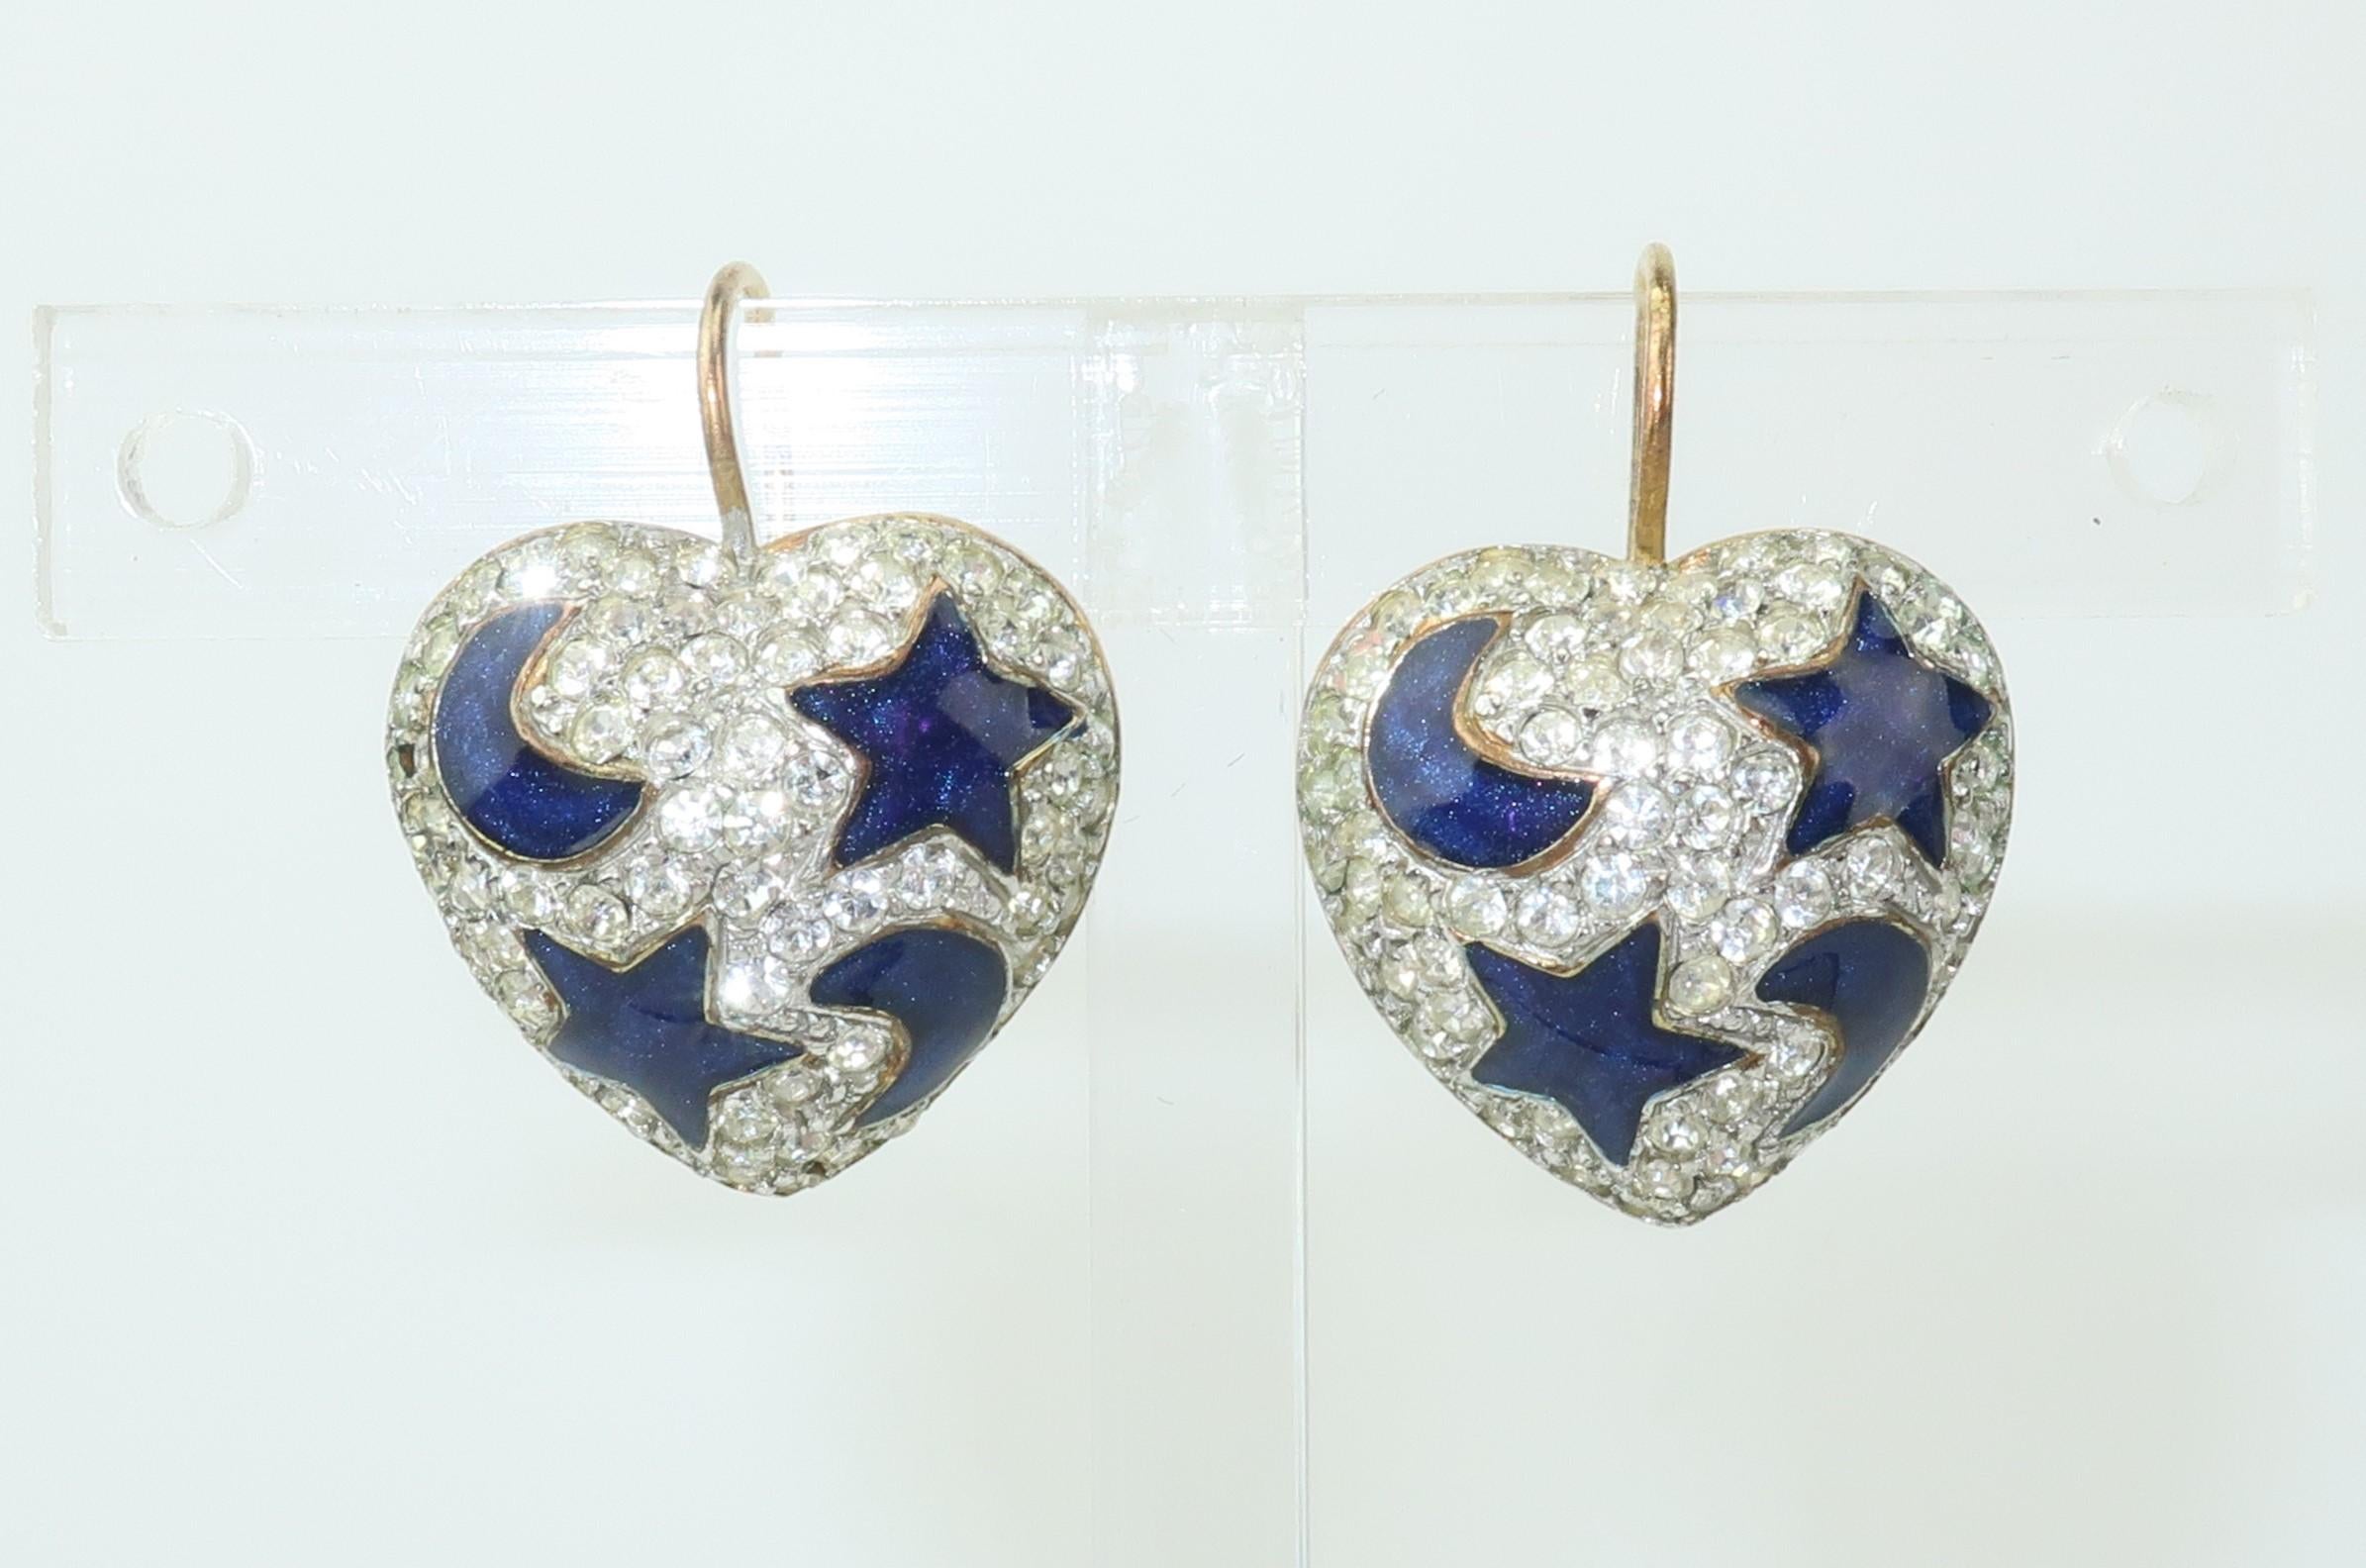 Aim for the stars and shoot for the moon!  These Swarovski crystal heart earrings are a lovely combination of sparkling stones and deep blue enamel in celestial star and moon shapes.  Outfitted with fish hook ear wires and lever backs for easy wear.